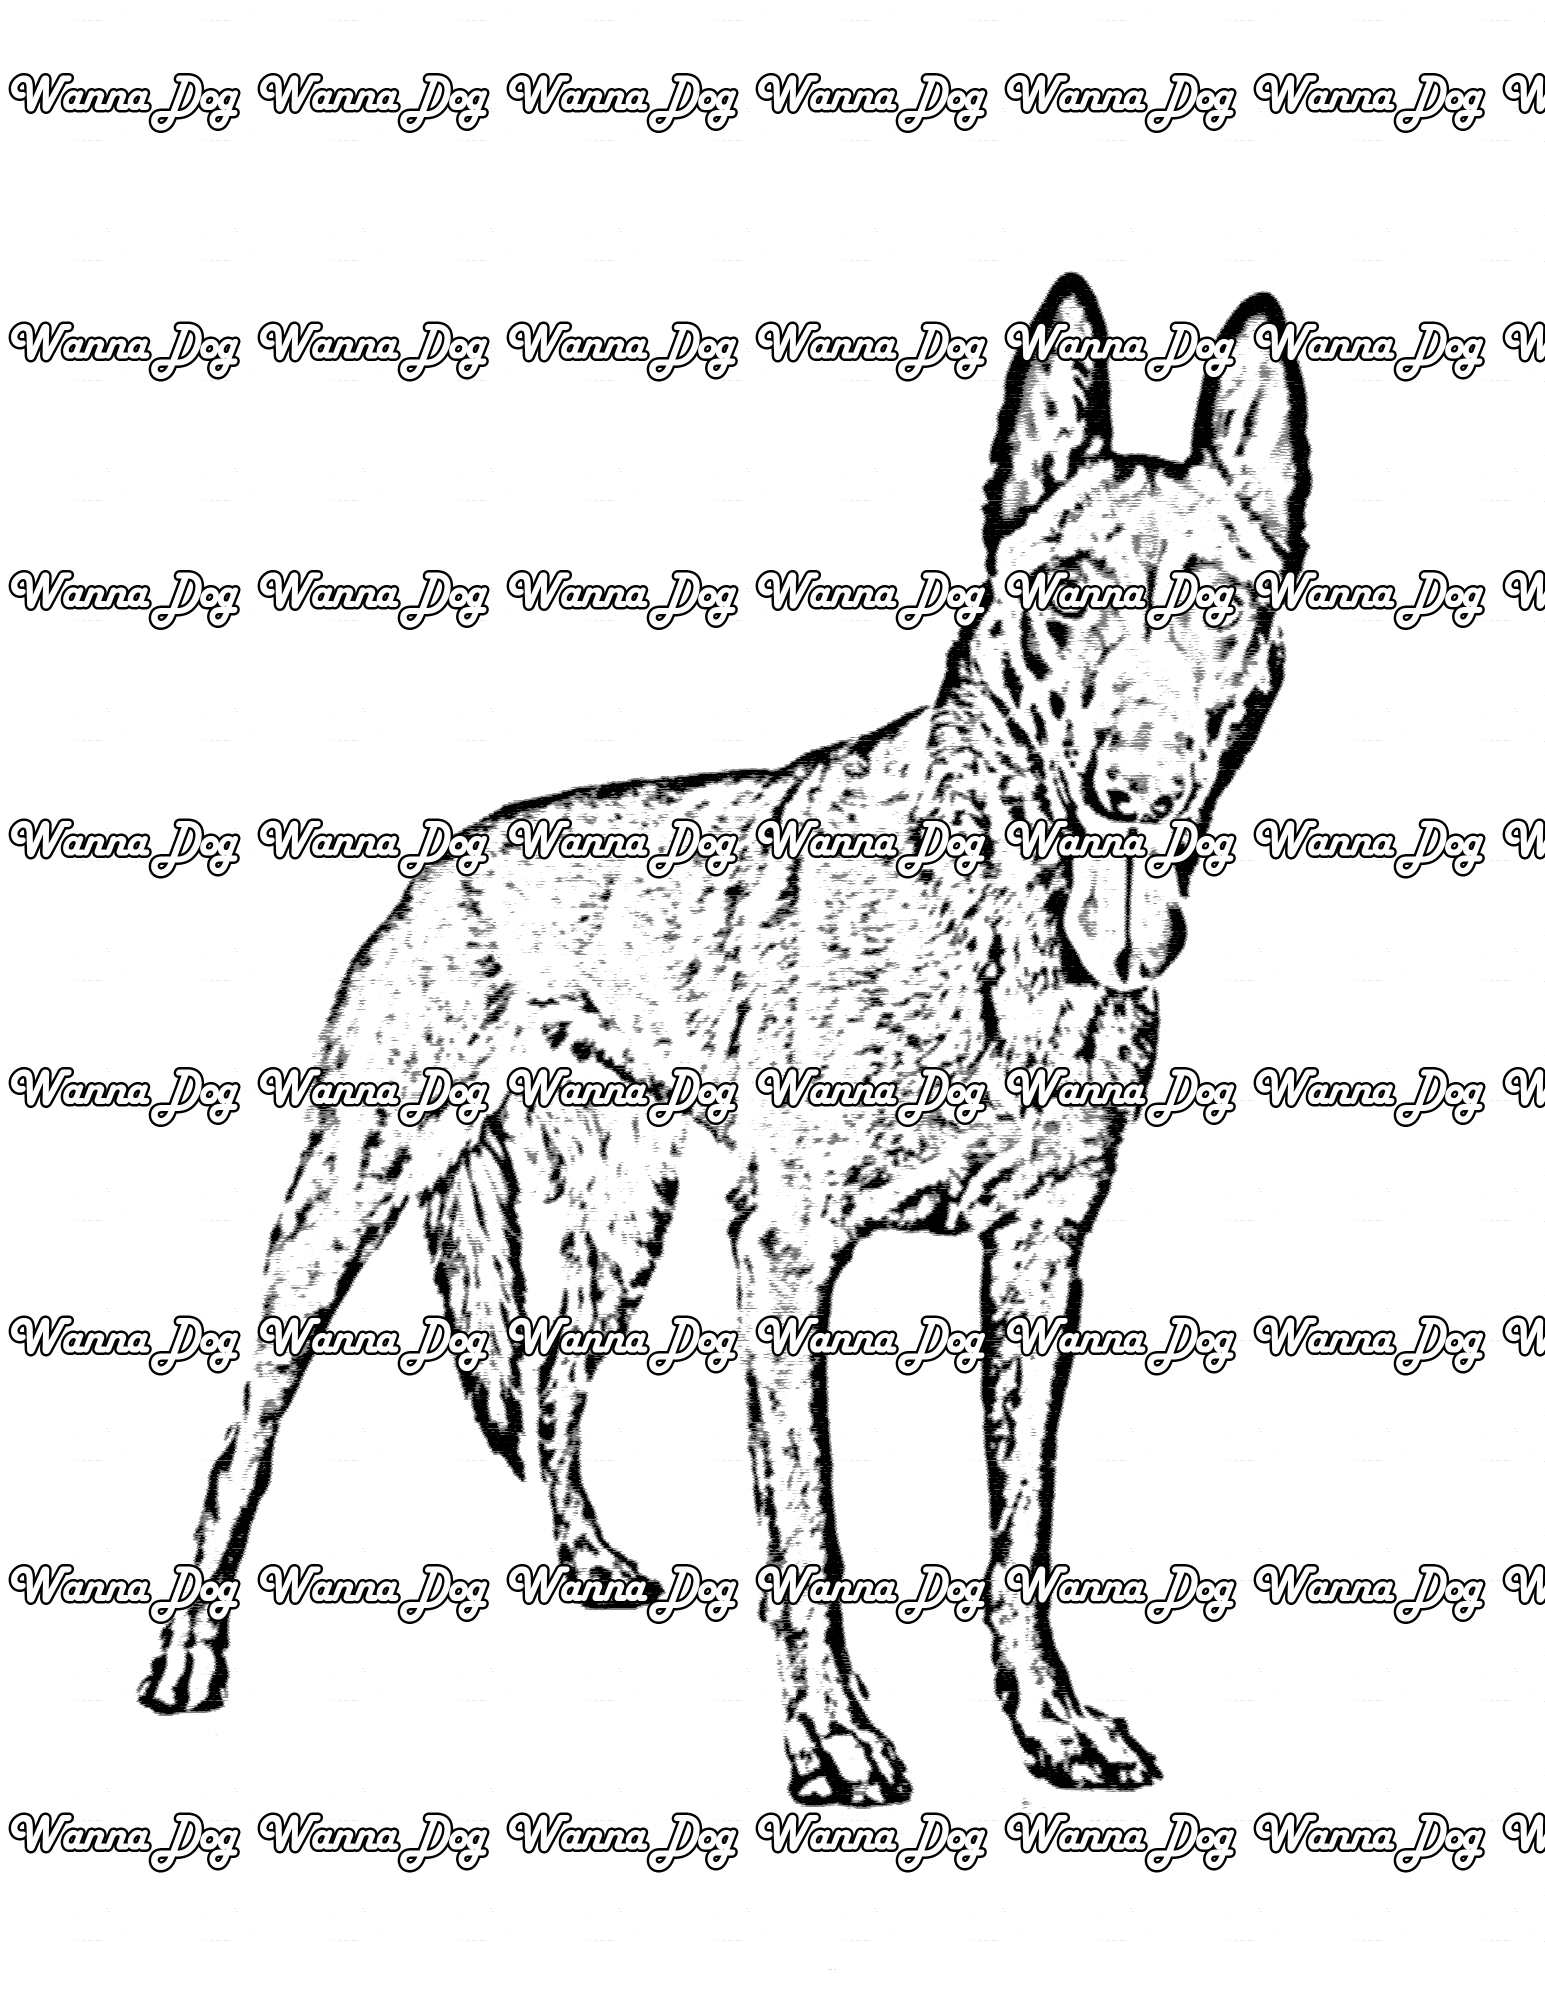 Belgian Malinois Coloring Page of a Belgian Malinois standing with their tongue out